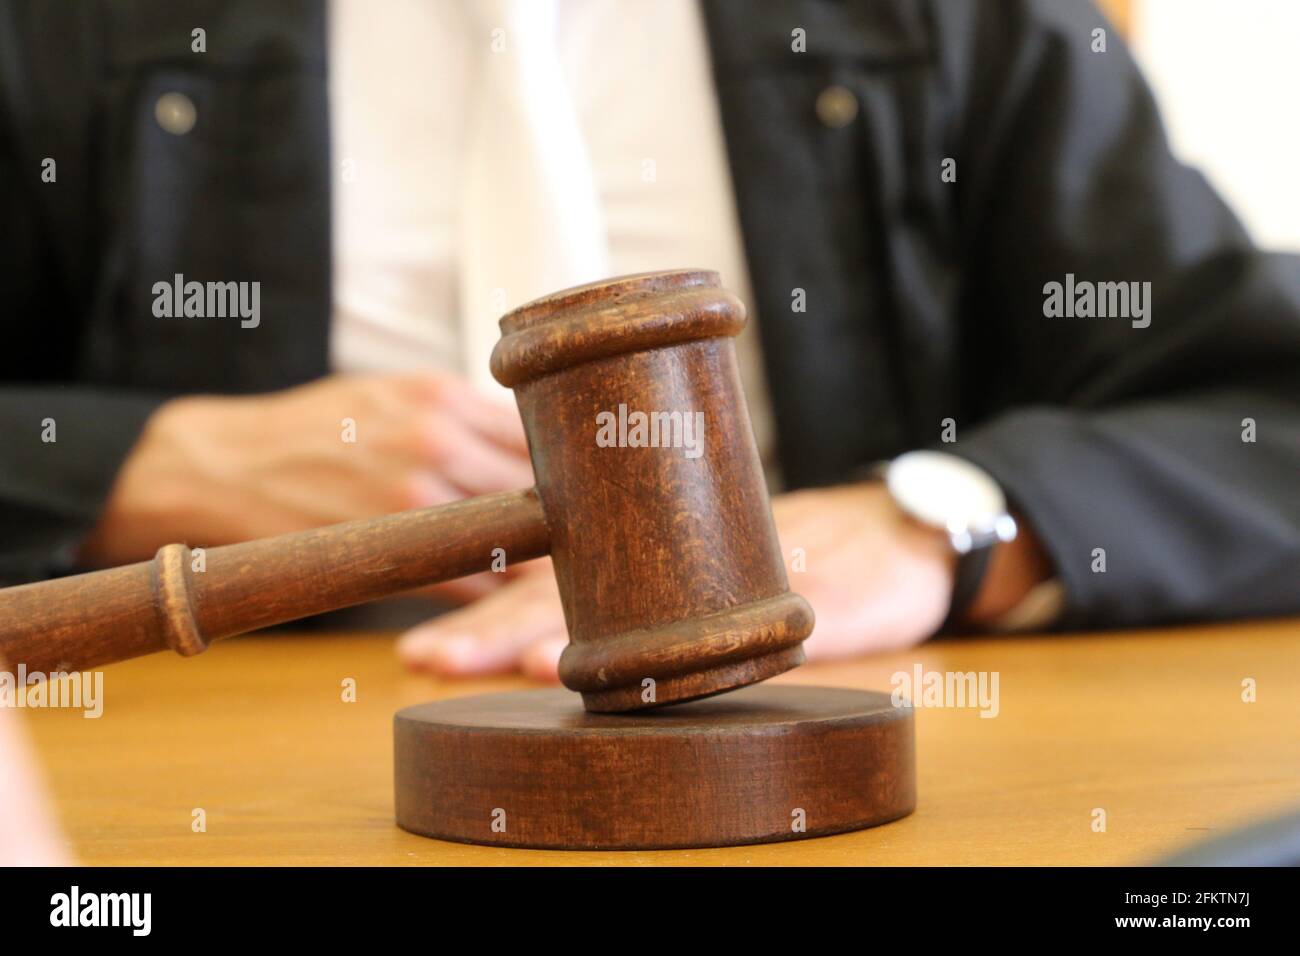 Close up of judge's gavel as symbol image for judgment. Stock Photo